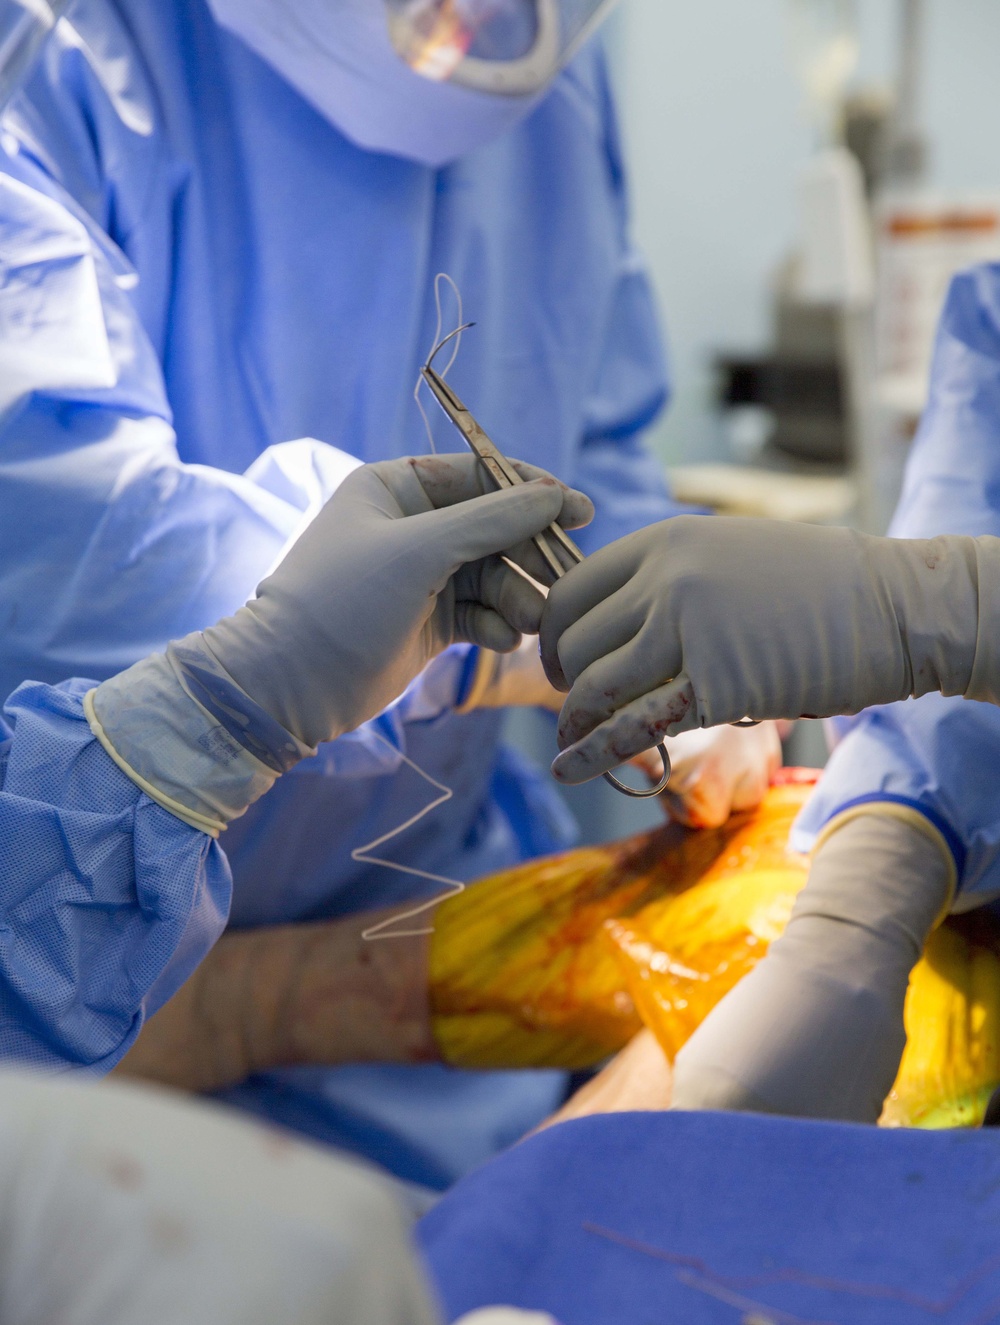 USNS Mercy personnel perform knee replacement surgery for Vietnamese patient